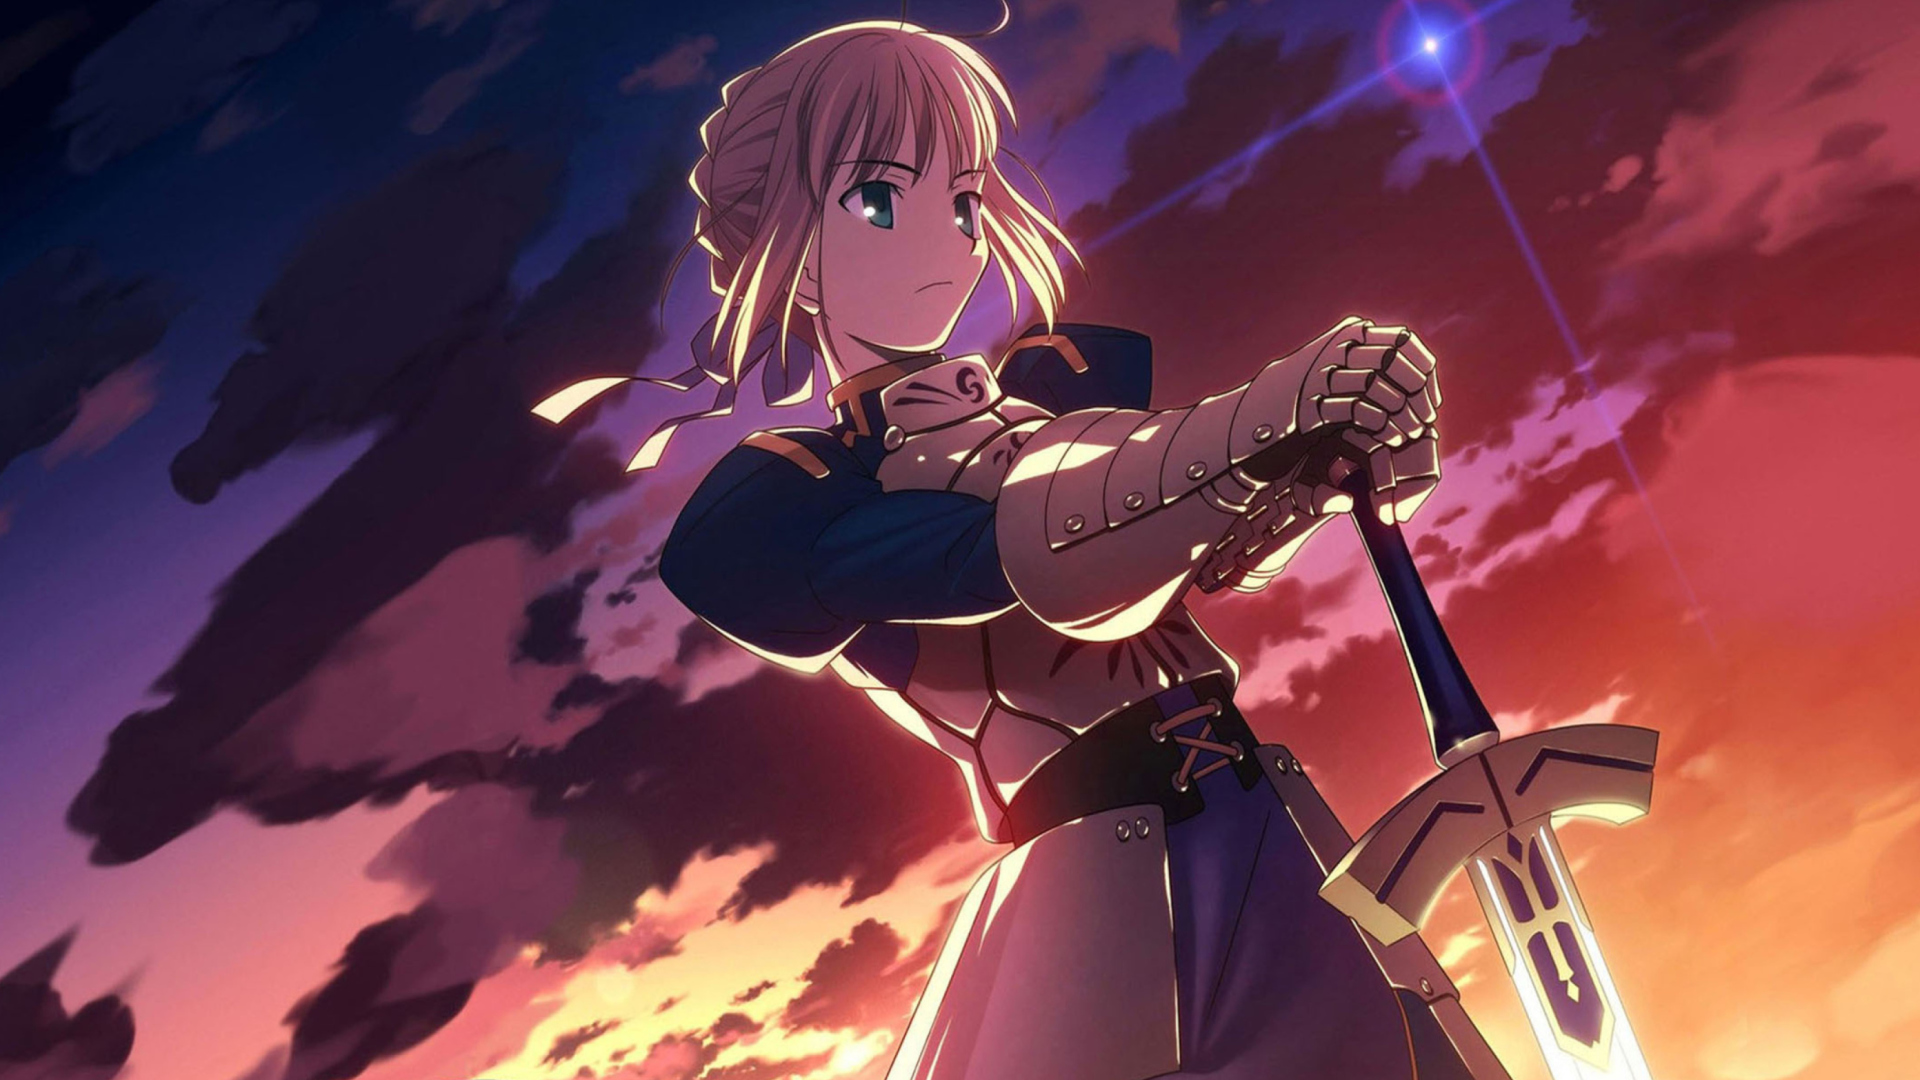 Das Saber from Fate/stay night Wallpaper 1920x1080